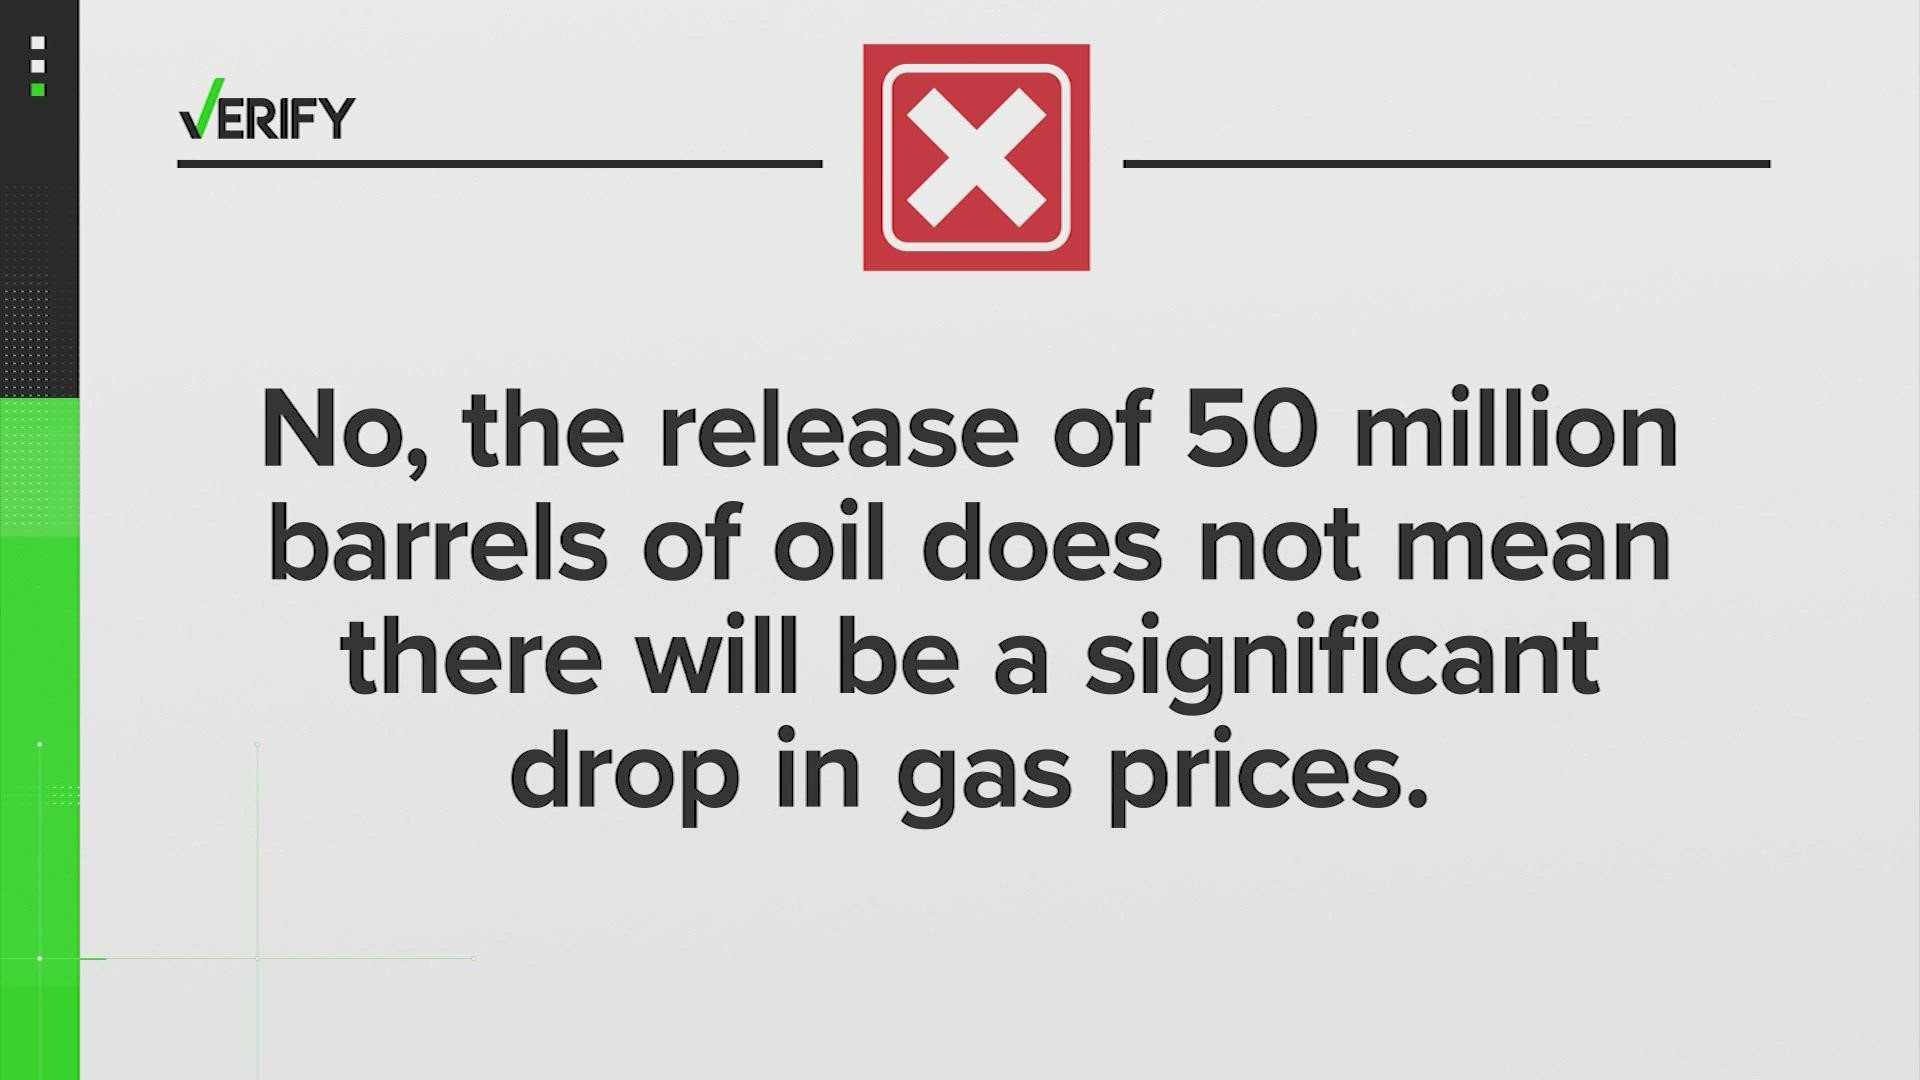 The administration will exchange 32 million barrels of oil and sell 18 million barrels under Biden’s plan. That doesn’t mean a dramatically lower price at the pump.